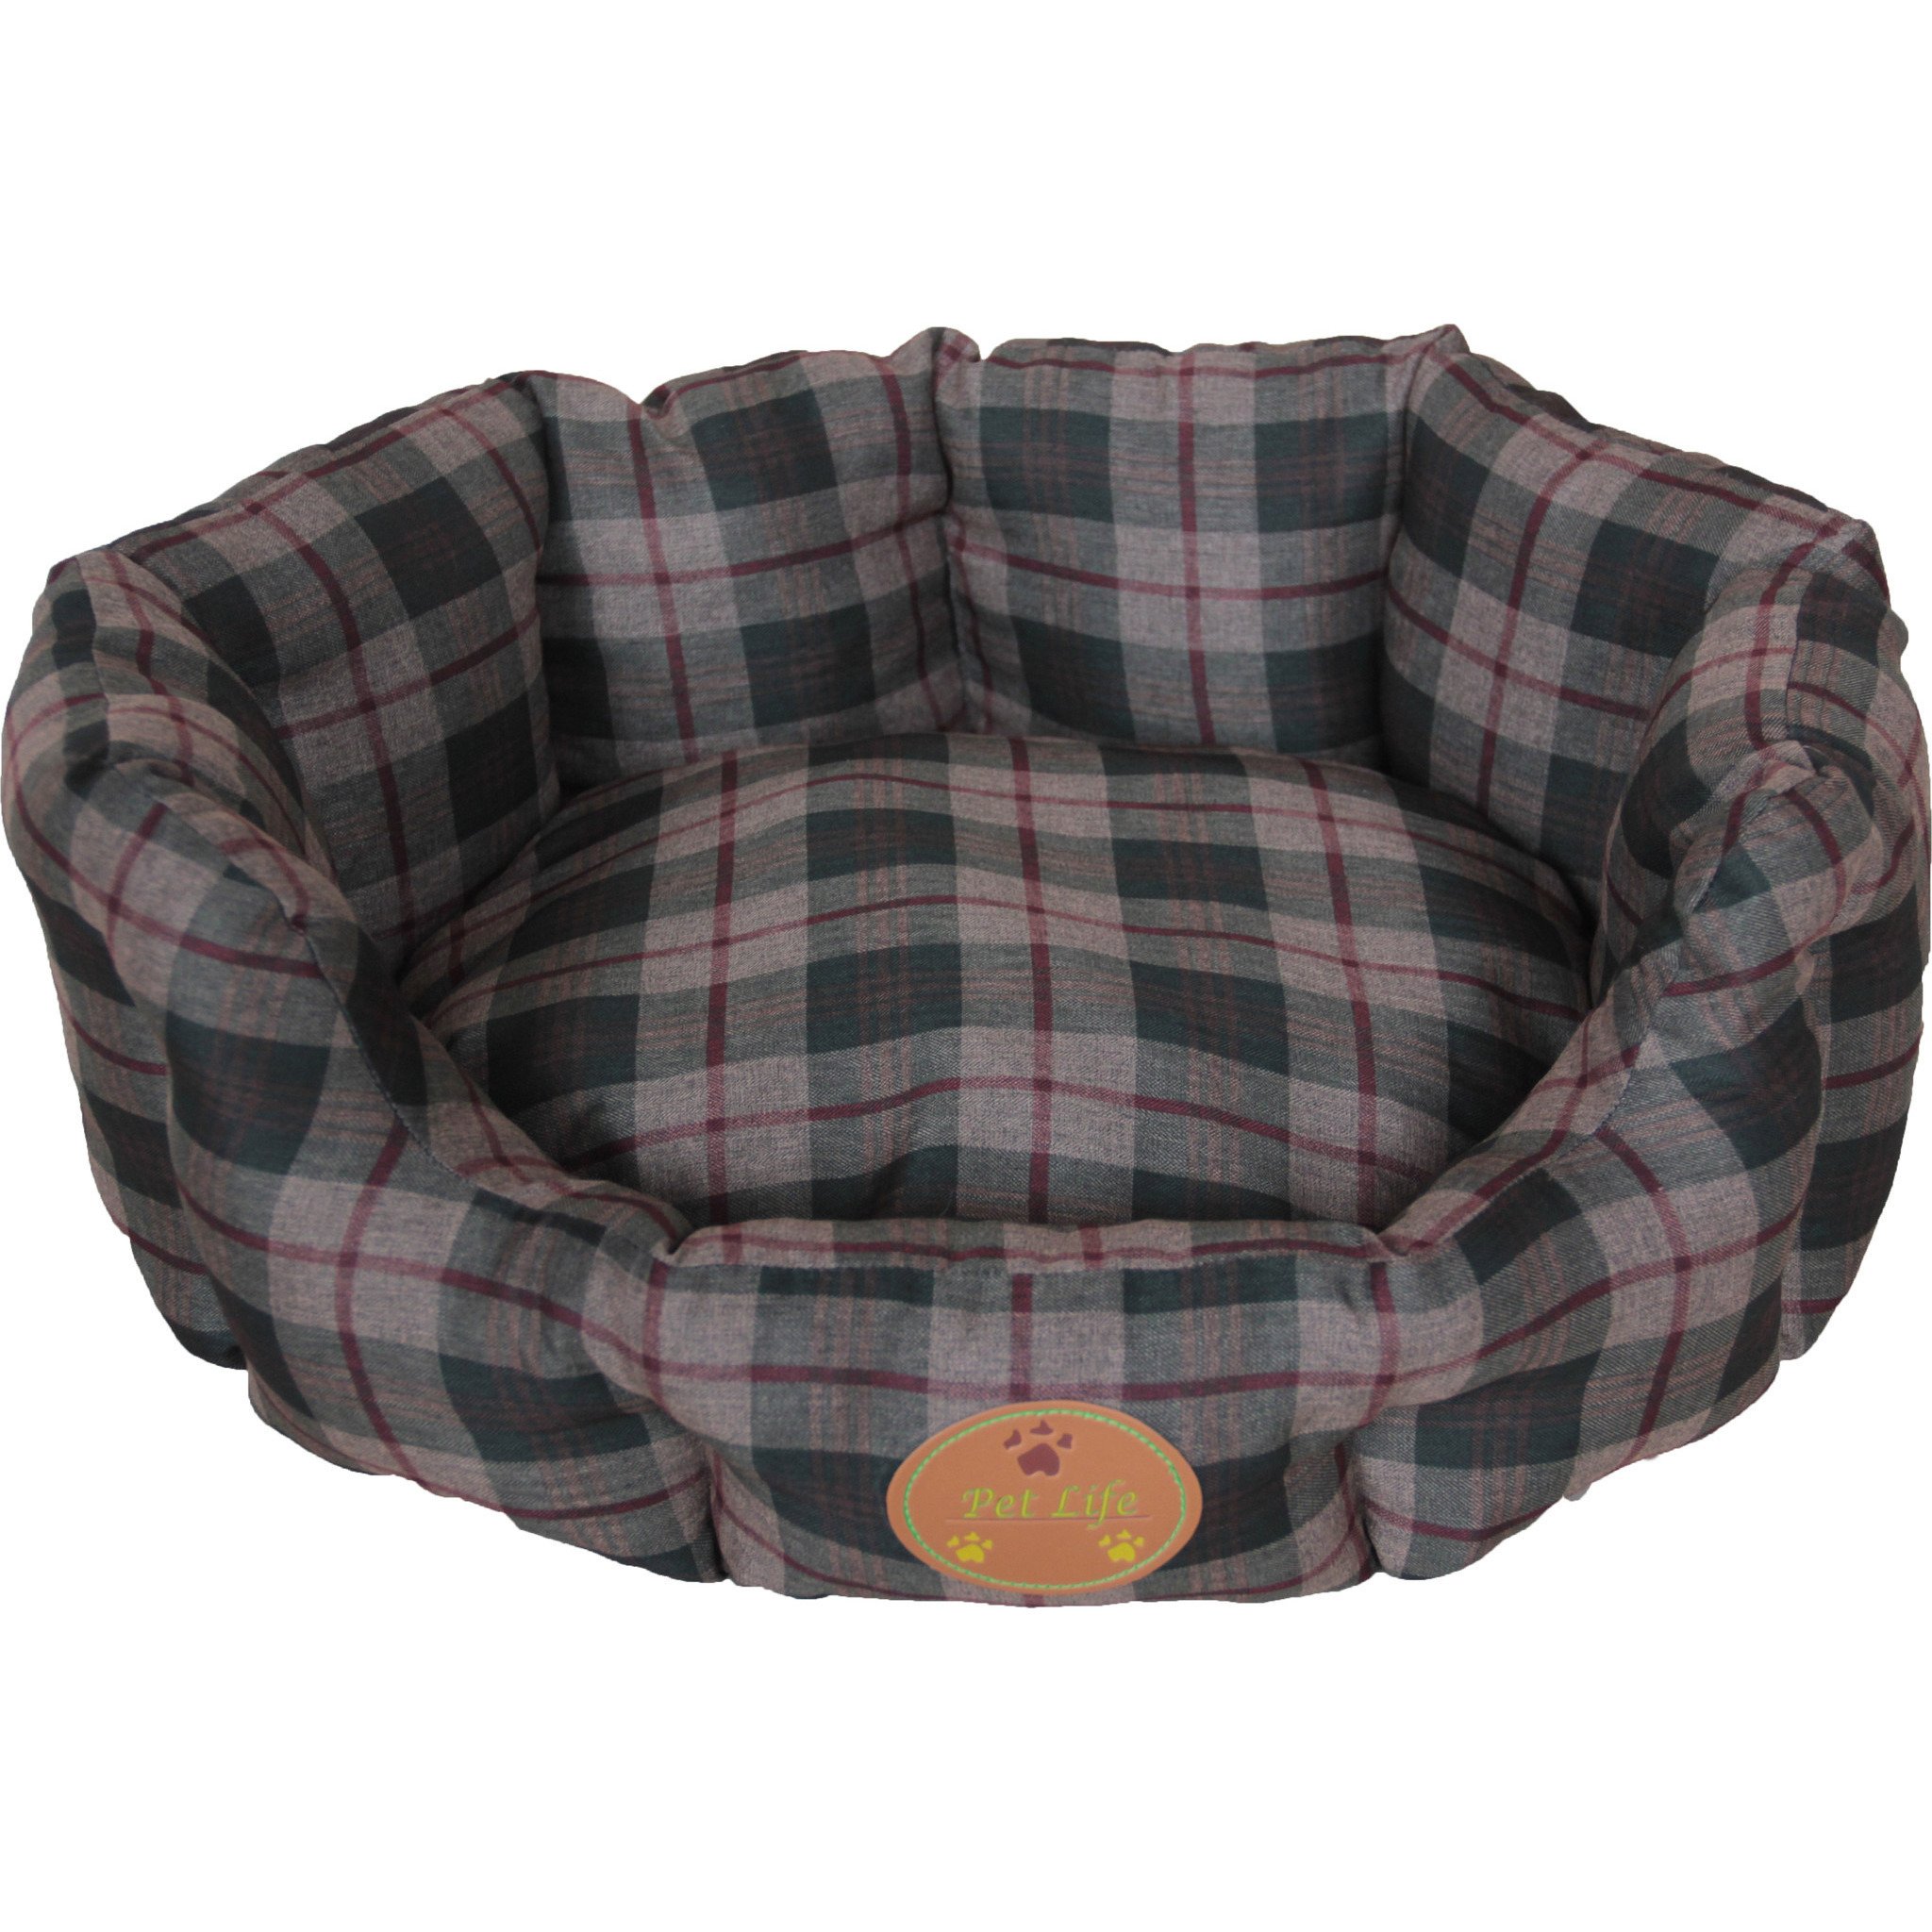 Wick-Away Nano-Silver and Anti-Bacterial Water Resistant Round Circular Dog Bed